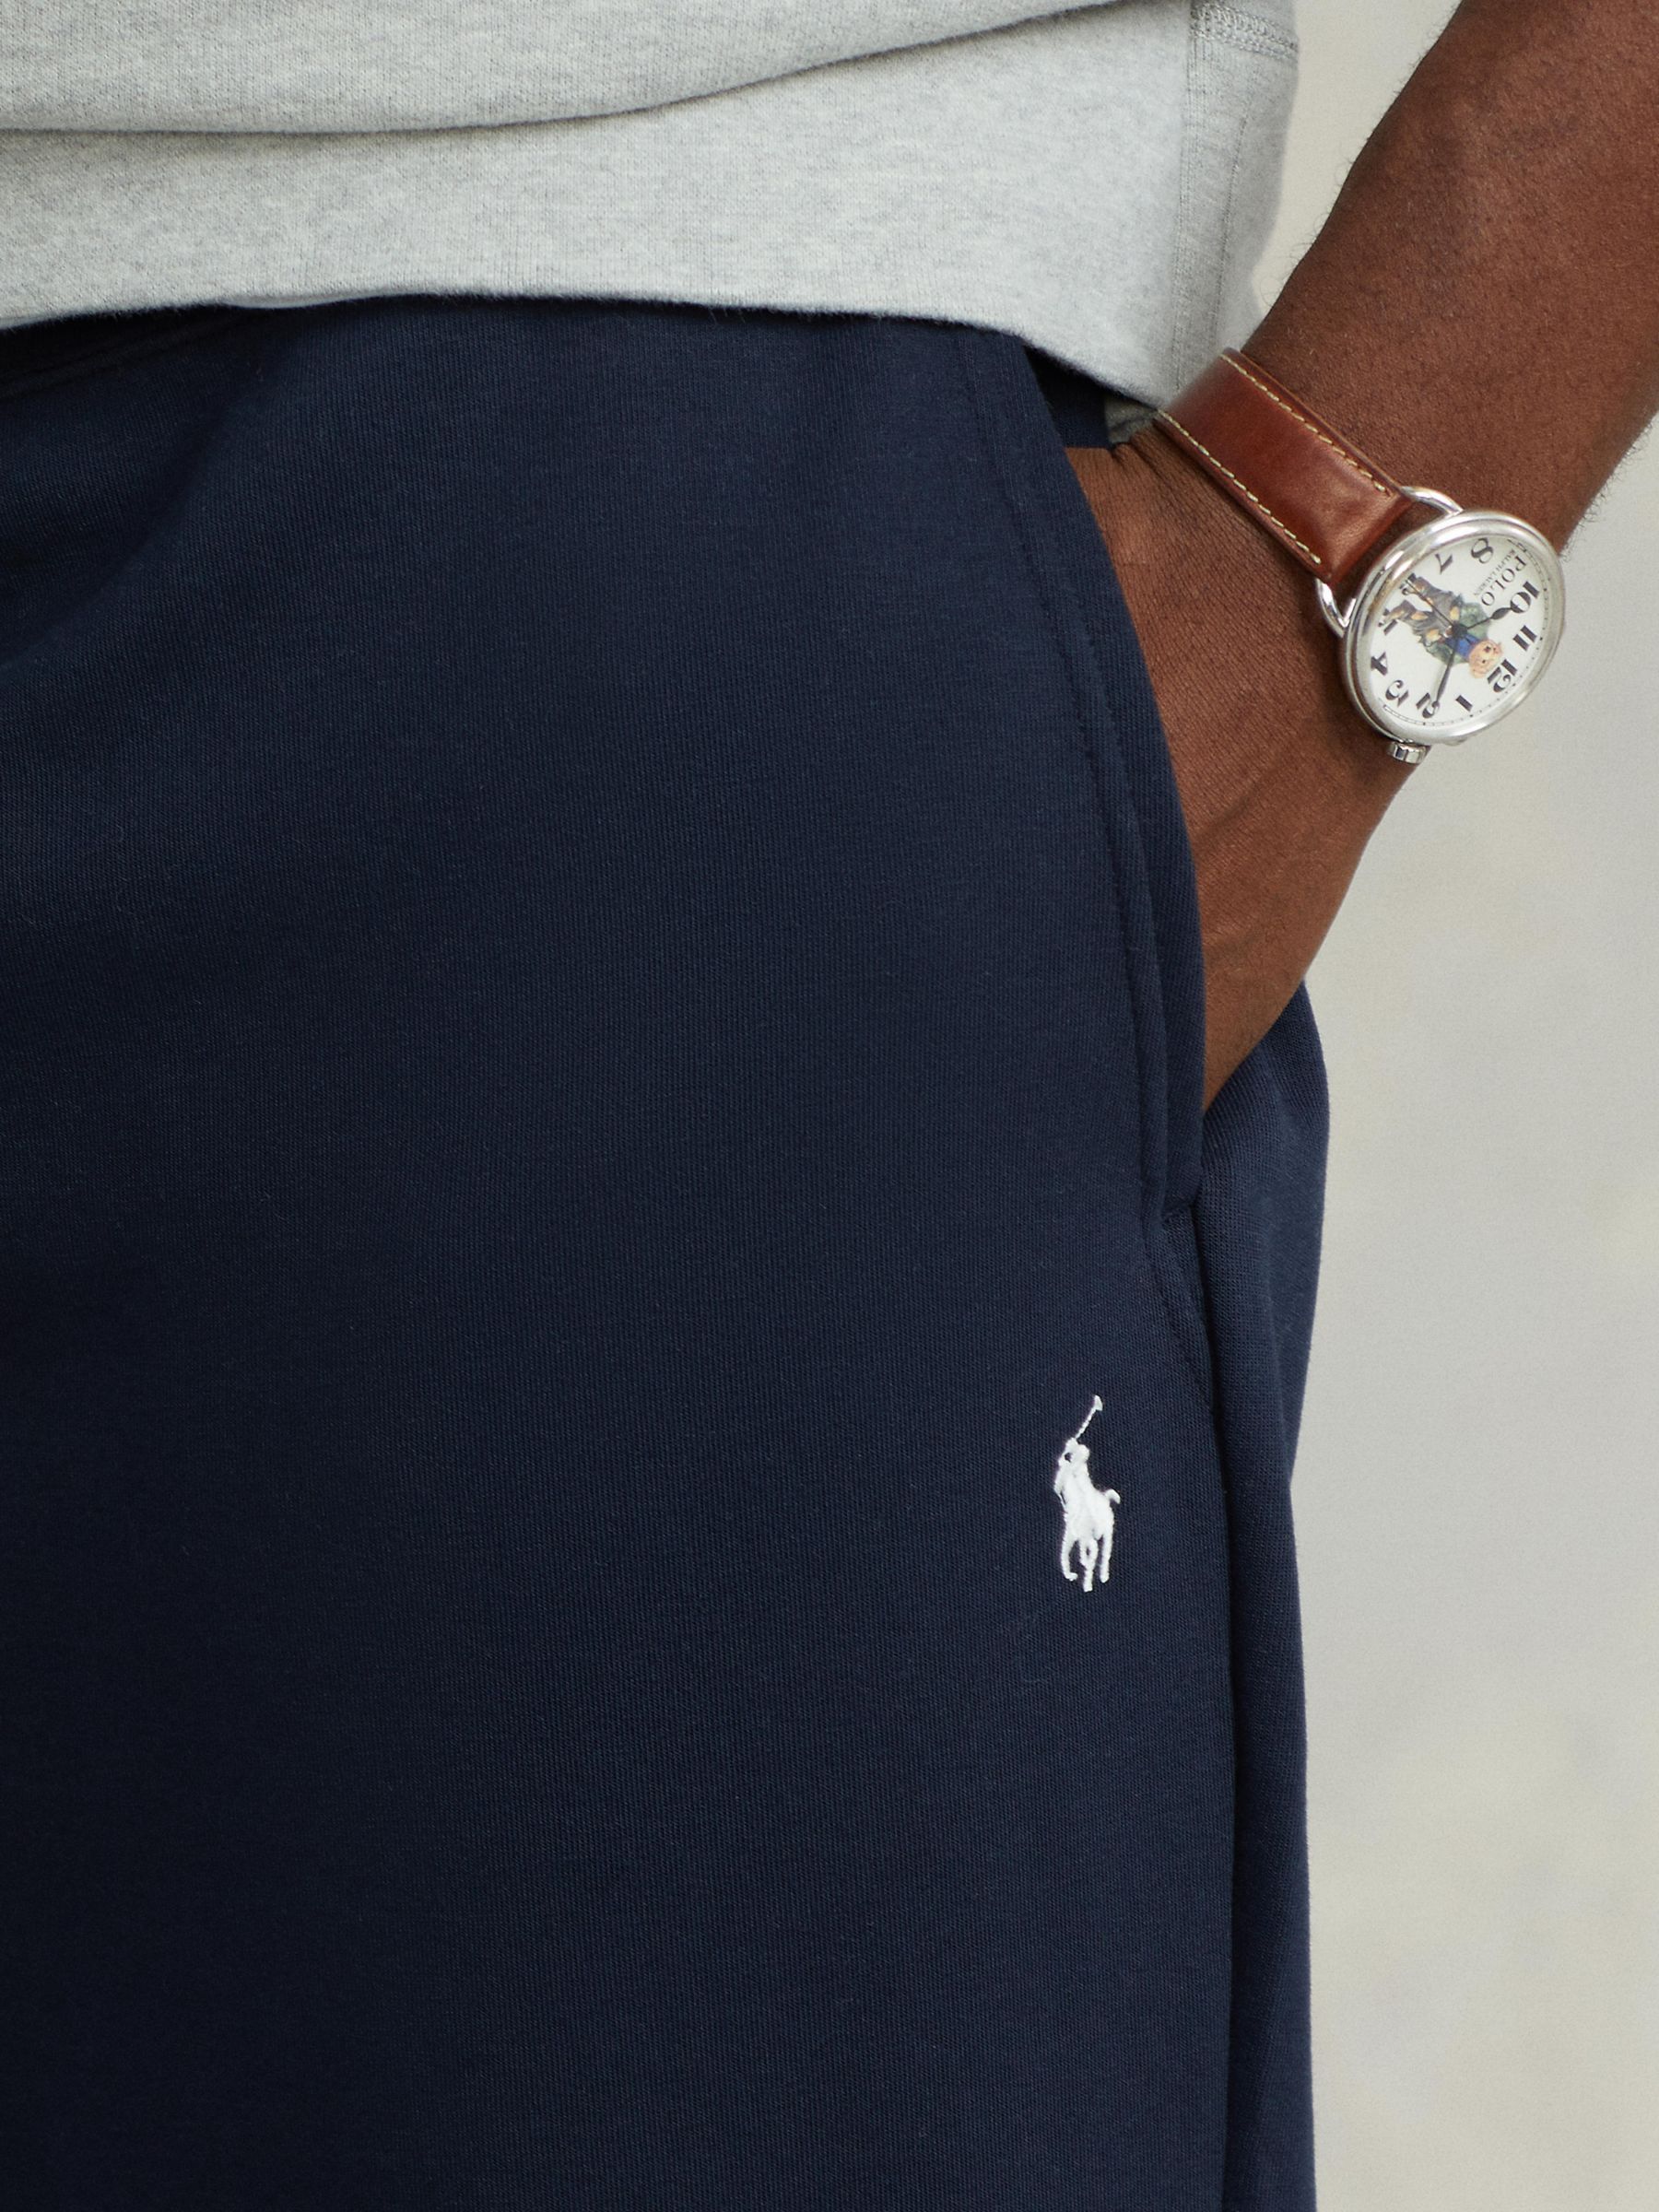 Buy Polo Ralph Lauren Big & Tall Double Knit Joggers, Navy Online at johnlewis.com